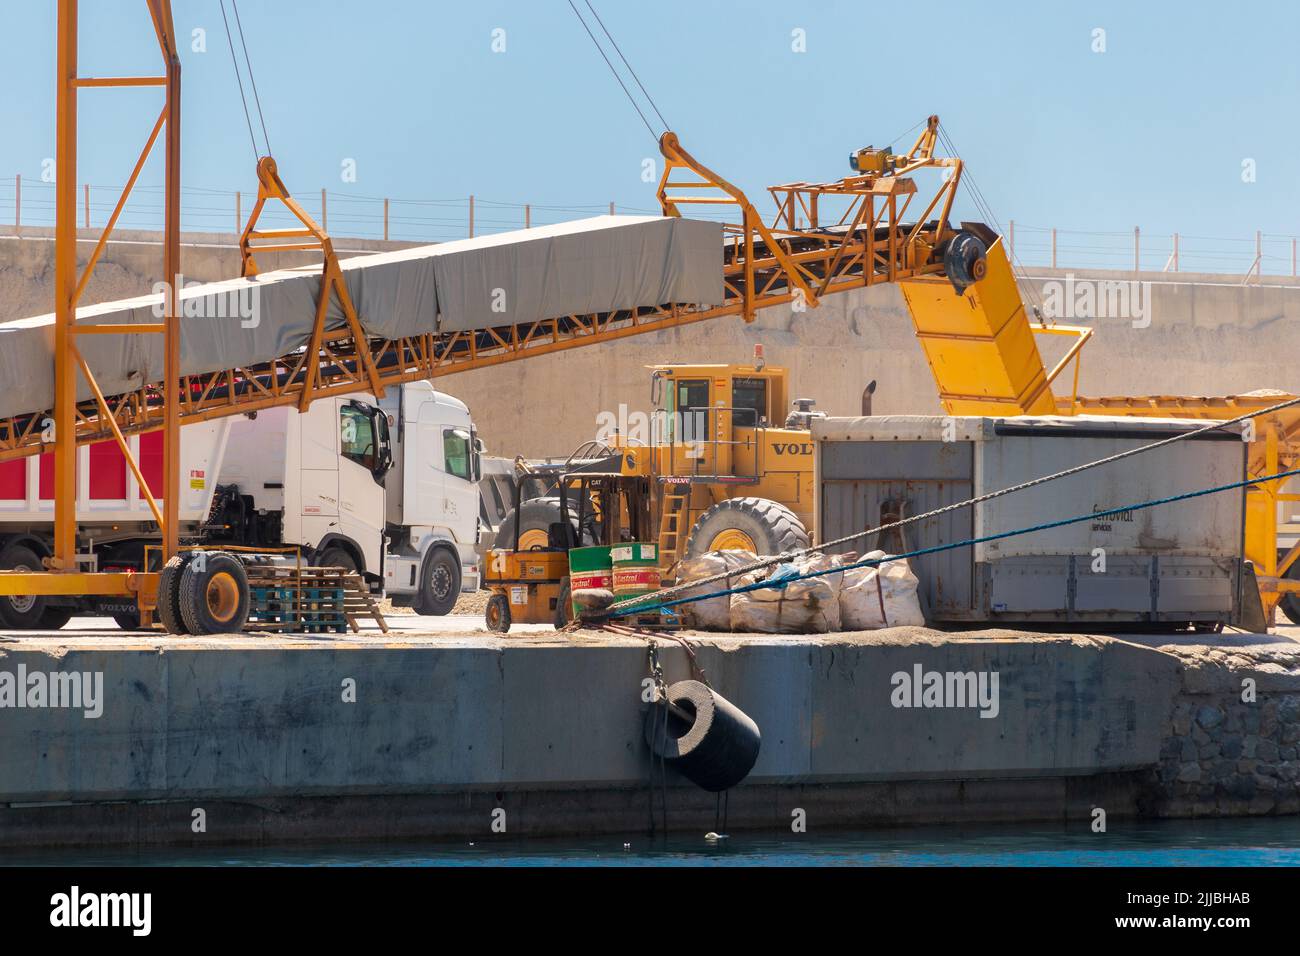 Equipment Used for Loading the Bulk Carrier Ships at the Port of Garrucha Almeria province, Andalucía, Spain Stock Photo